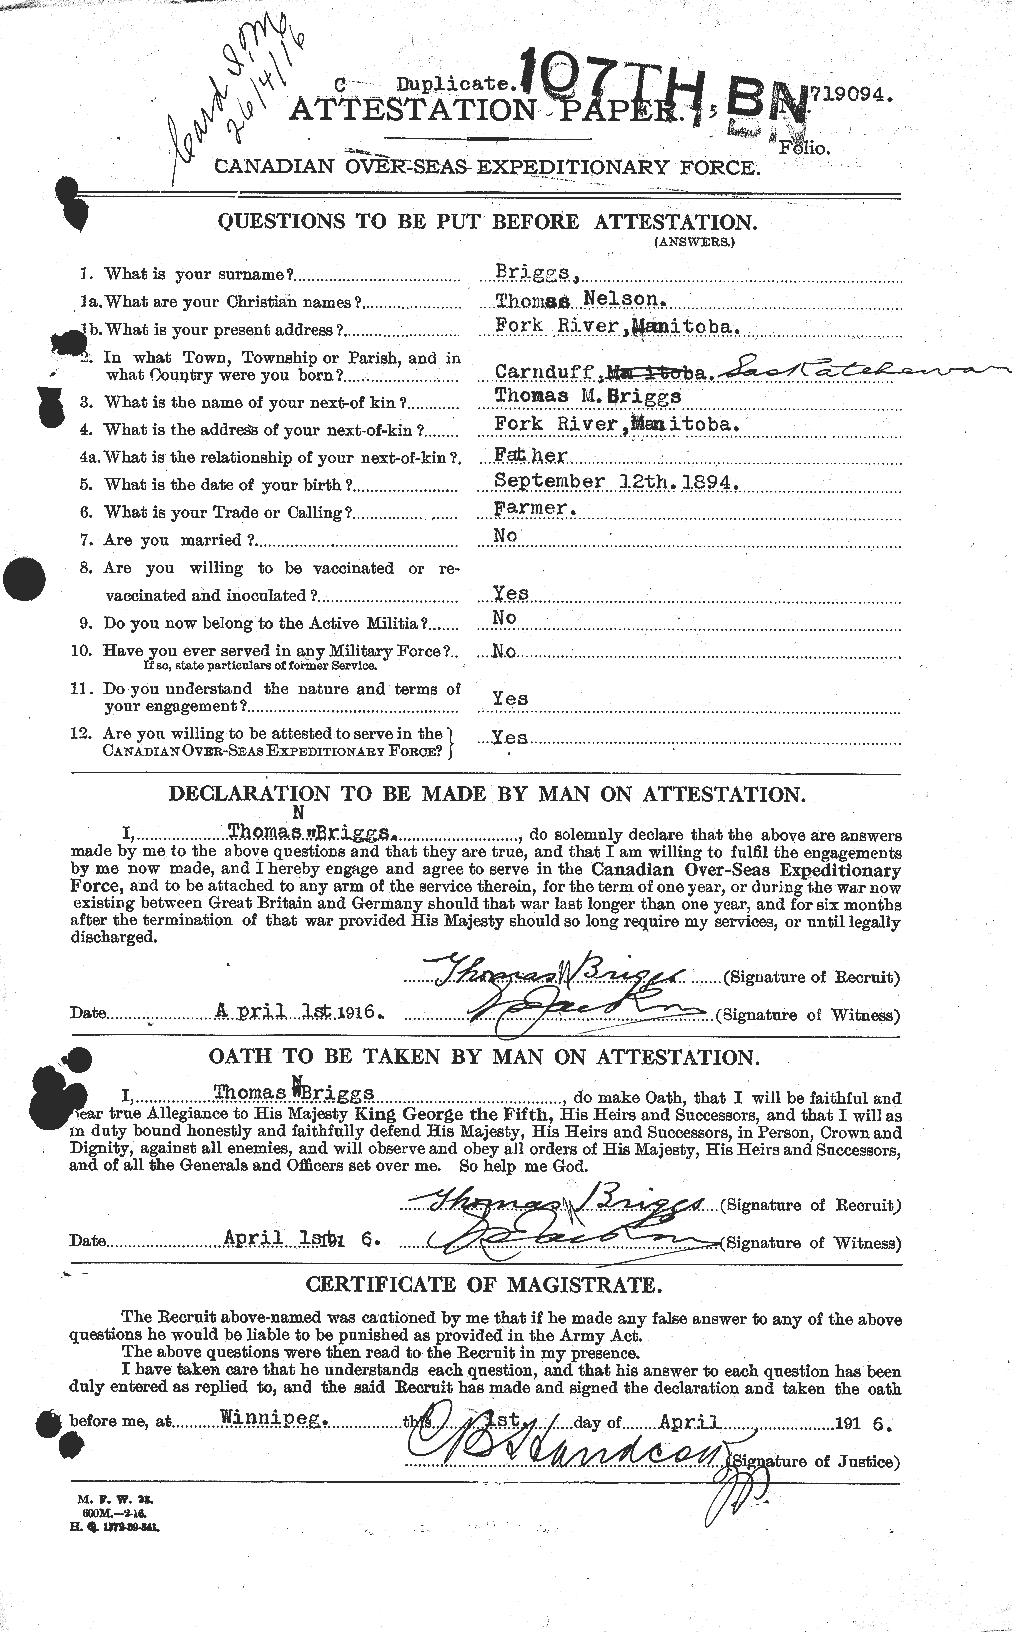 Personnel Records of the First World War - CEF 264106a